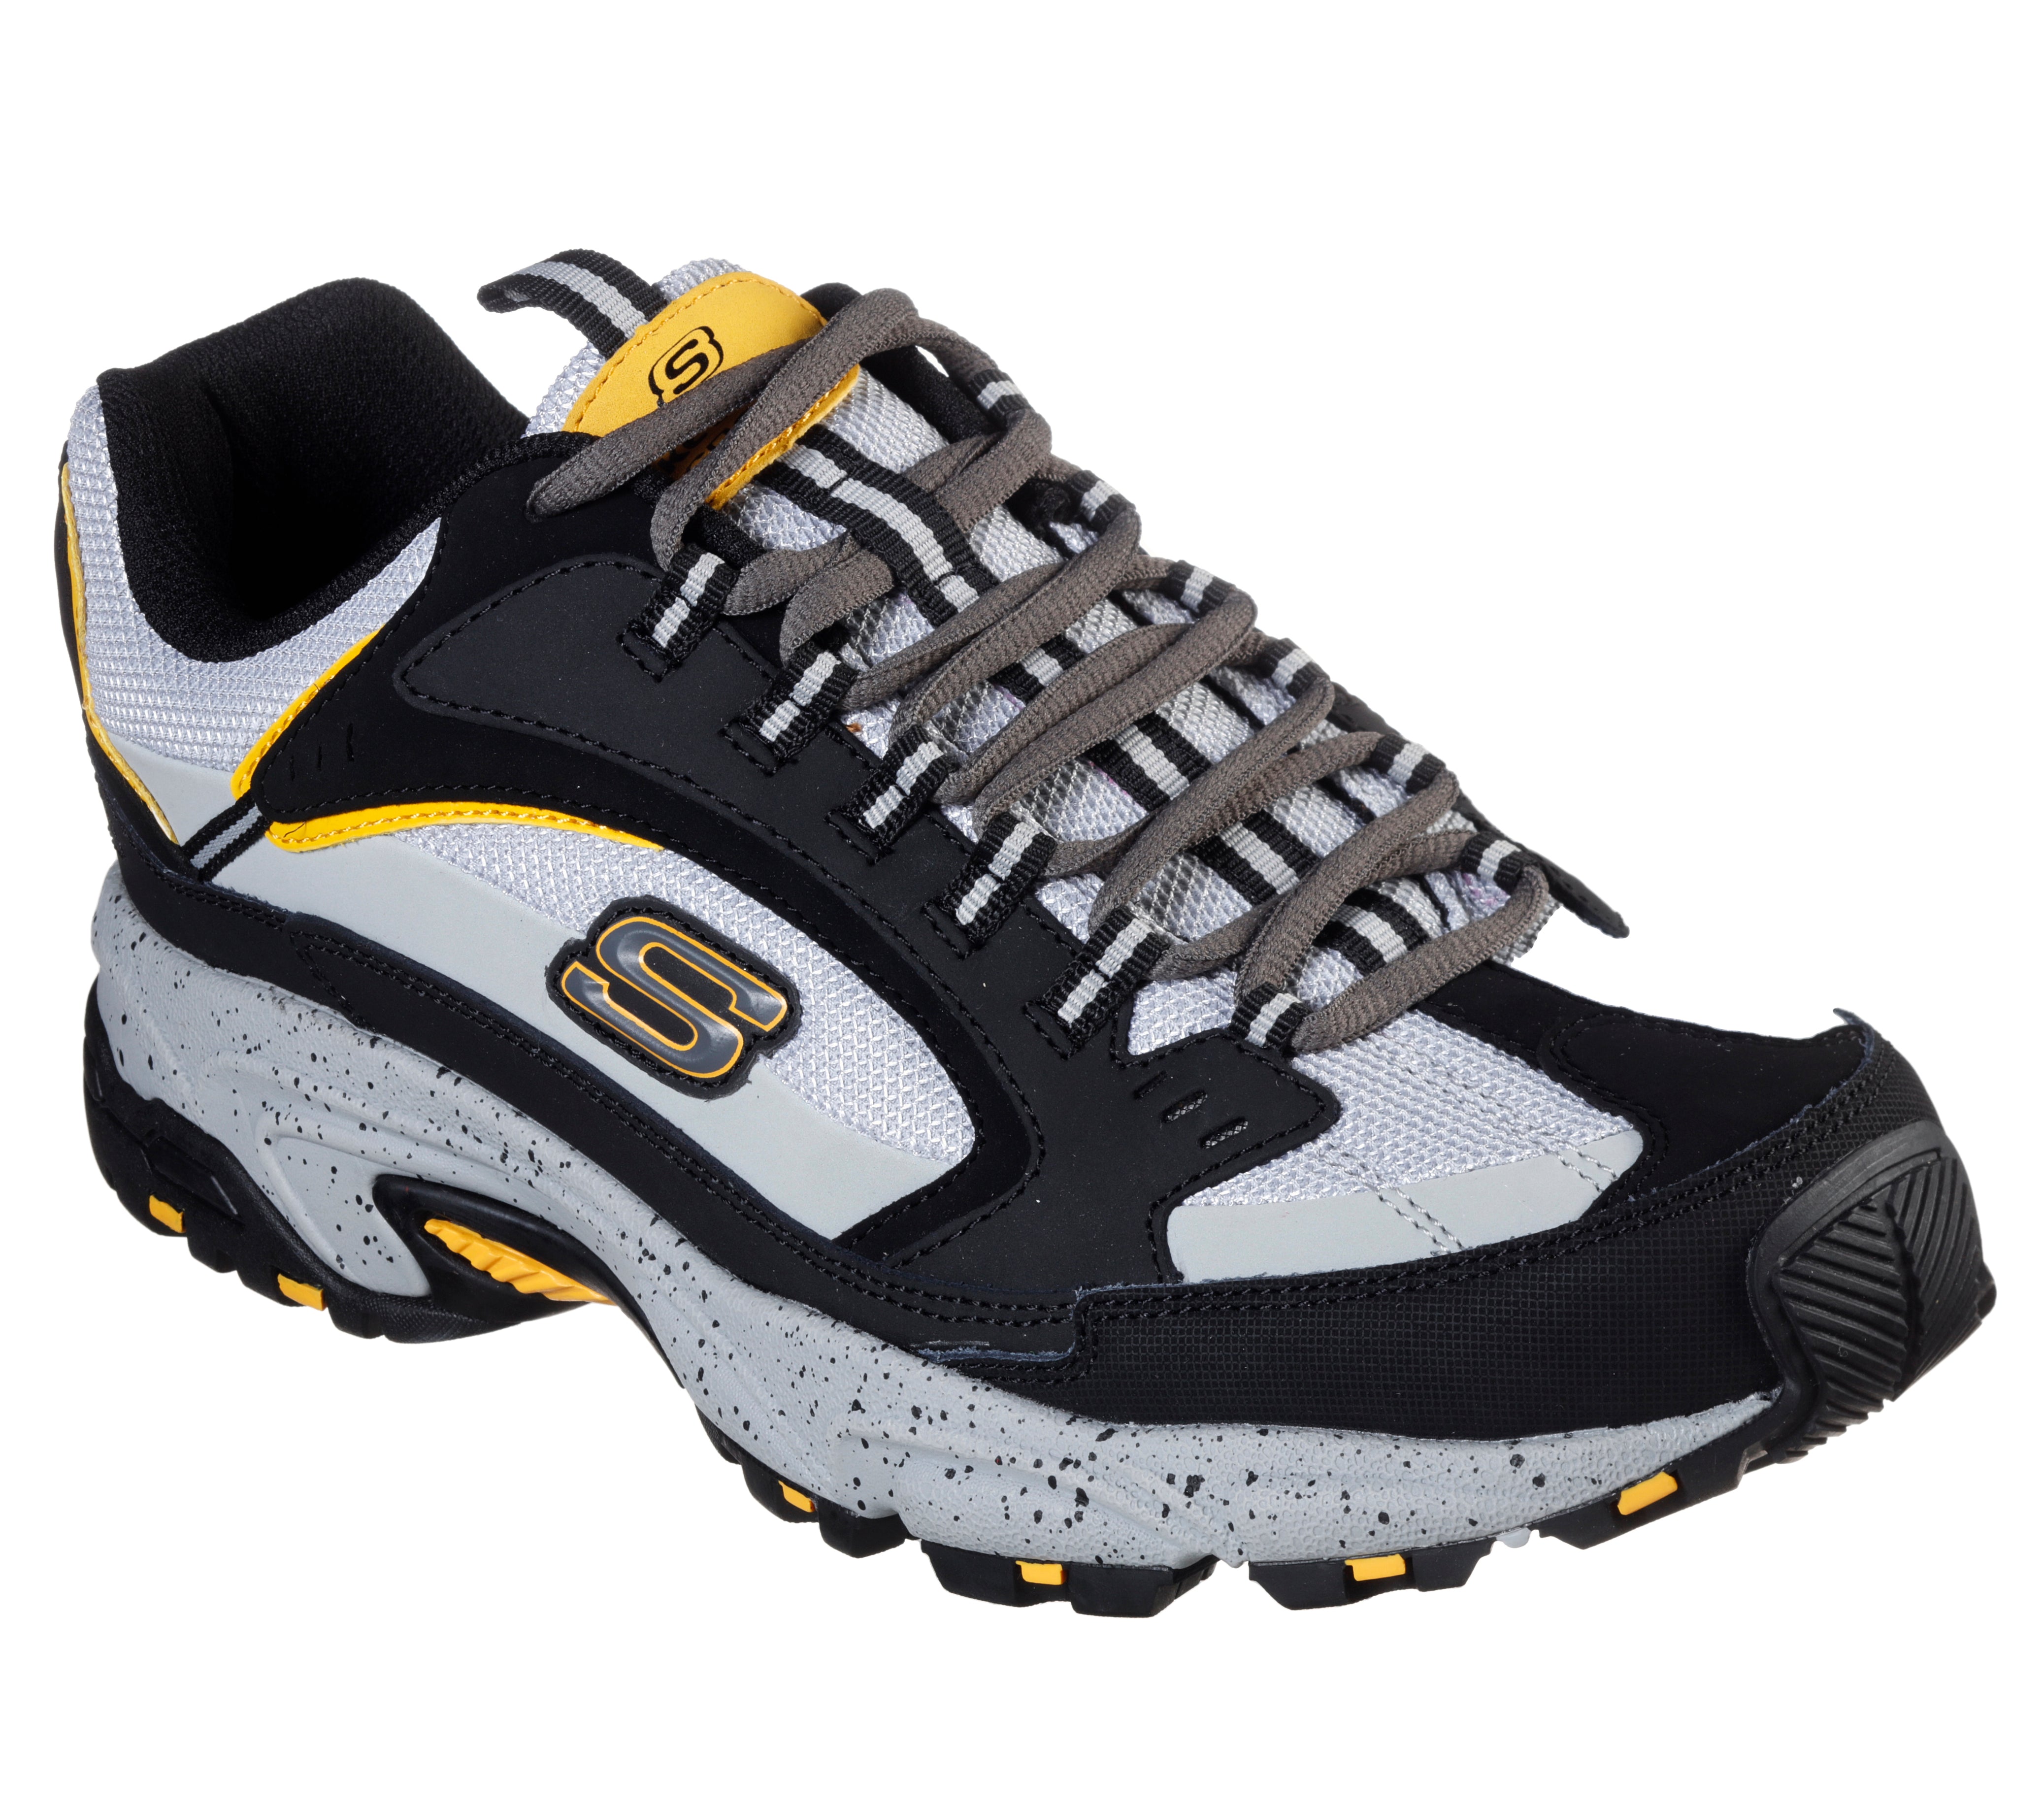 Skechers' Men's Stamina-Cutback Trainer - Black Grey – Outfitter